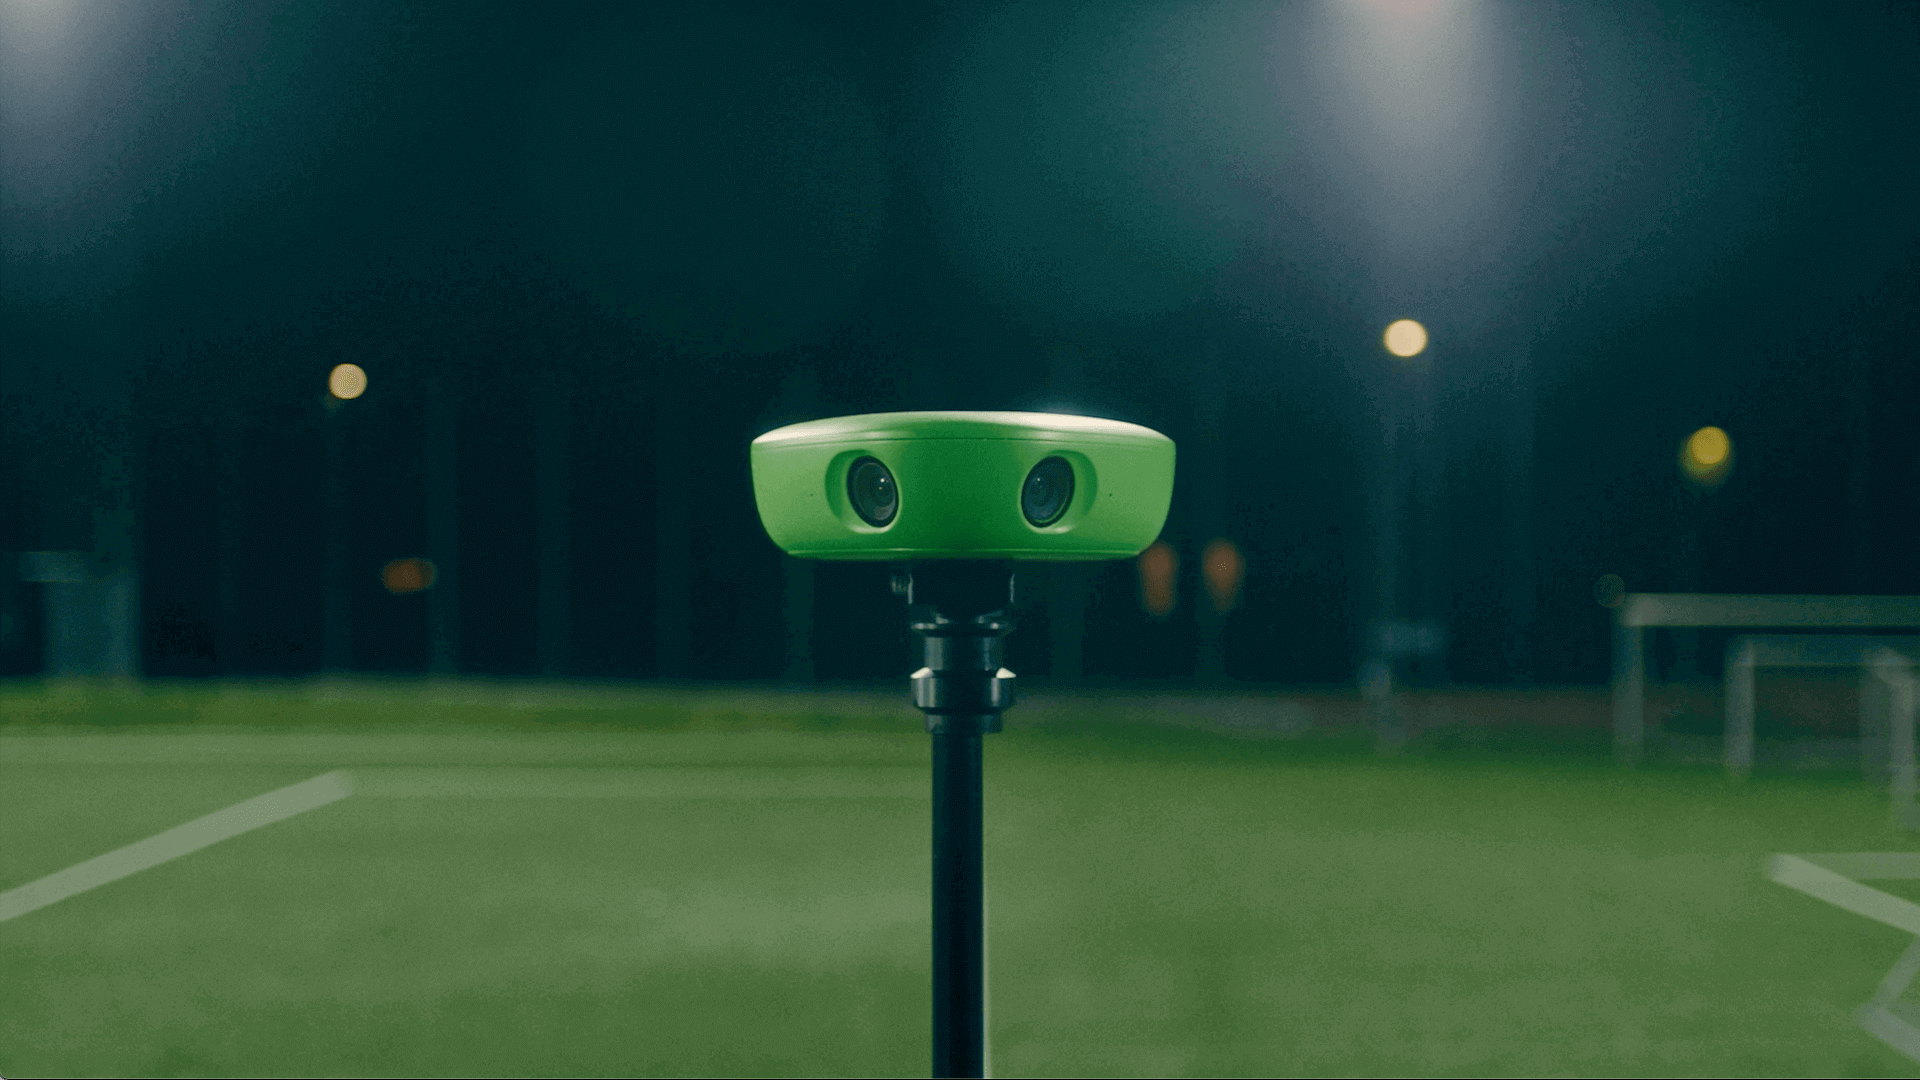 Veo Sports Camera at Soccer Field in Low Light Conditions - Capturing Performance and Analysis with Cutting-Edge Technology.